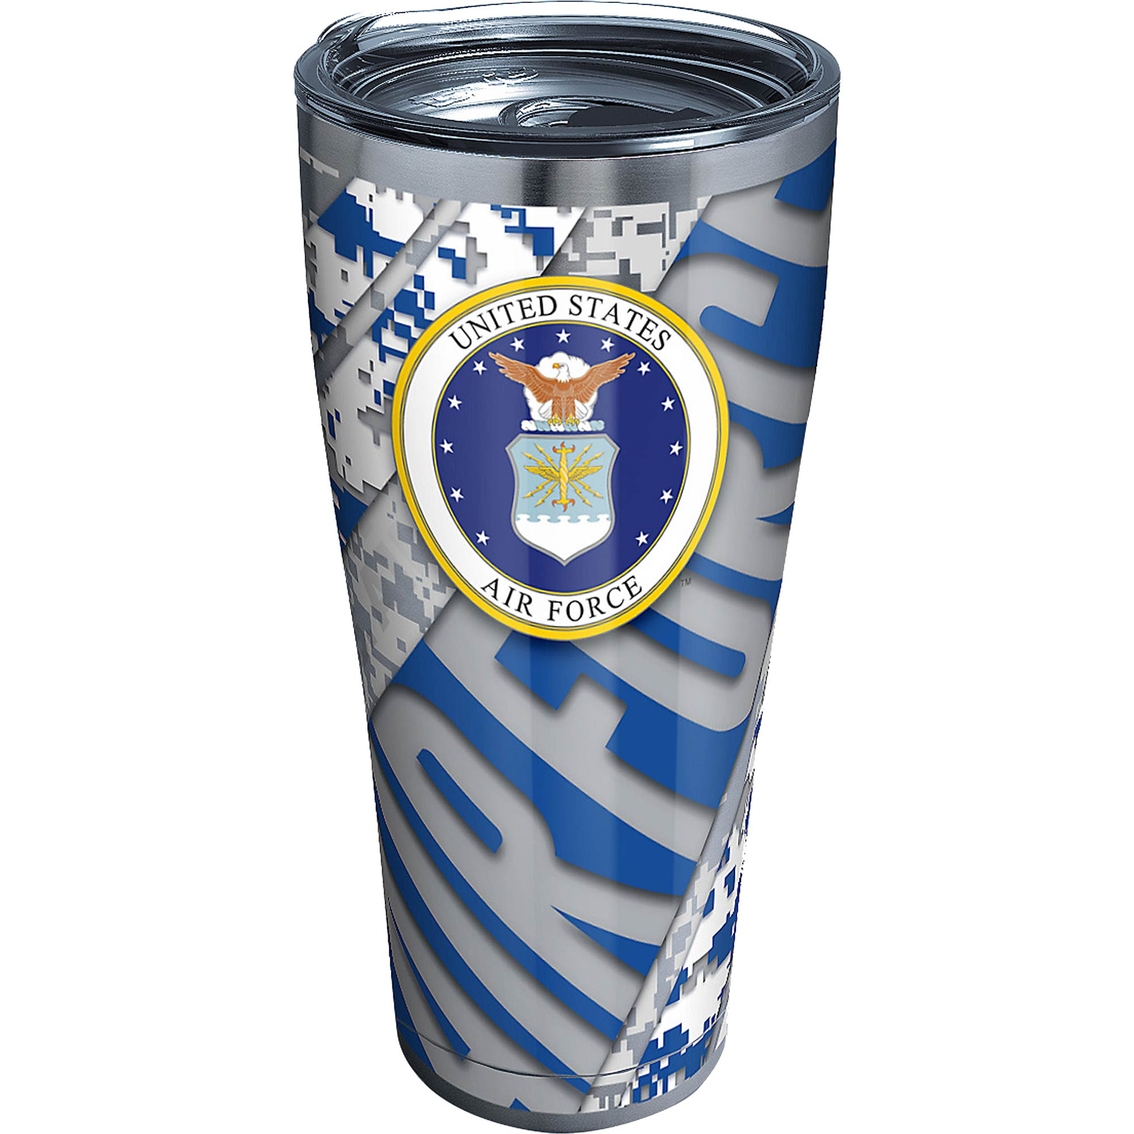 Tervis Tumblers Air Force 30 oz. Stainless Steel Tumbler